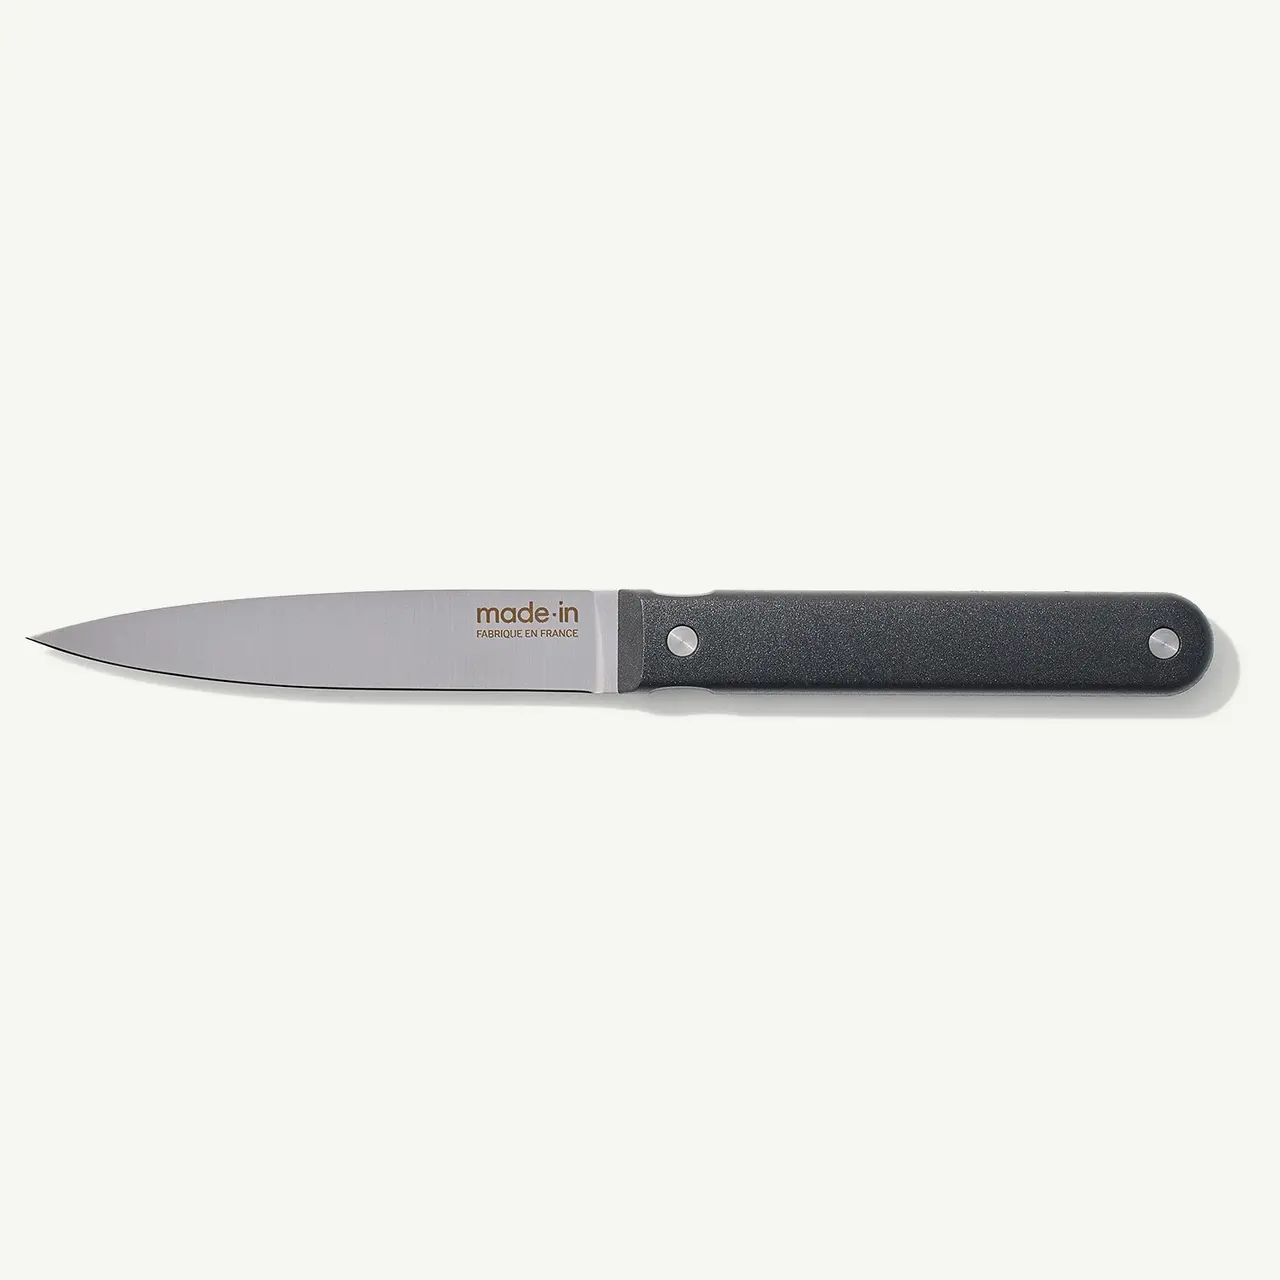 A chef's knife with a black handle and the brand "made in" imprinted on the blade is lying on a white background.